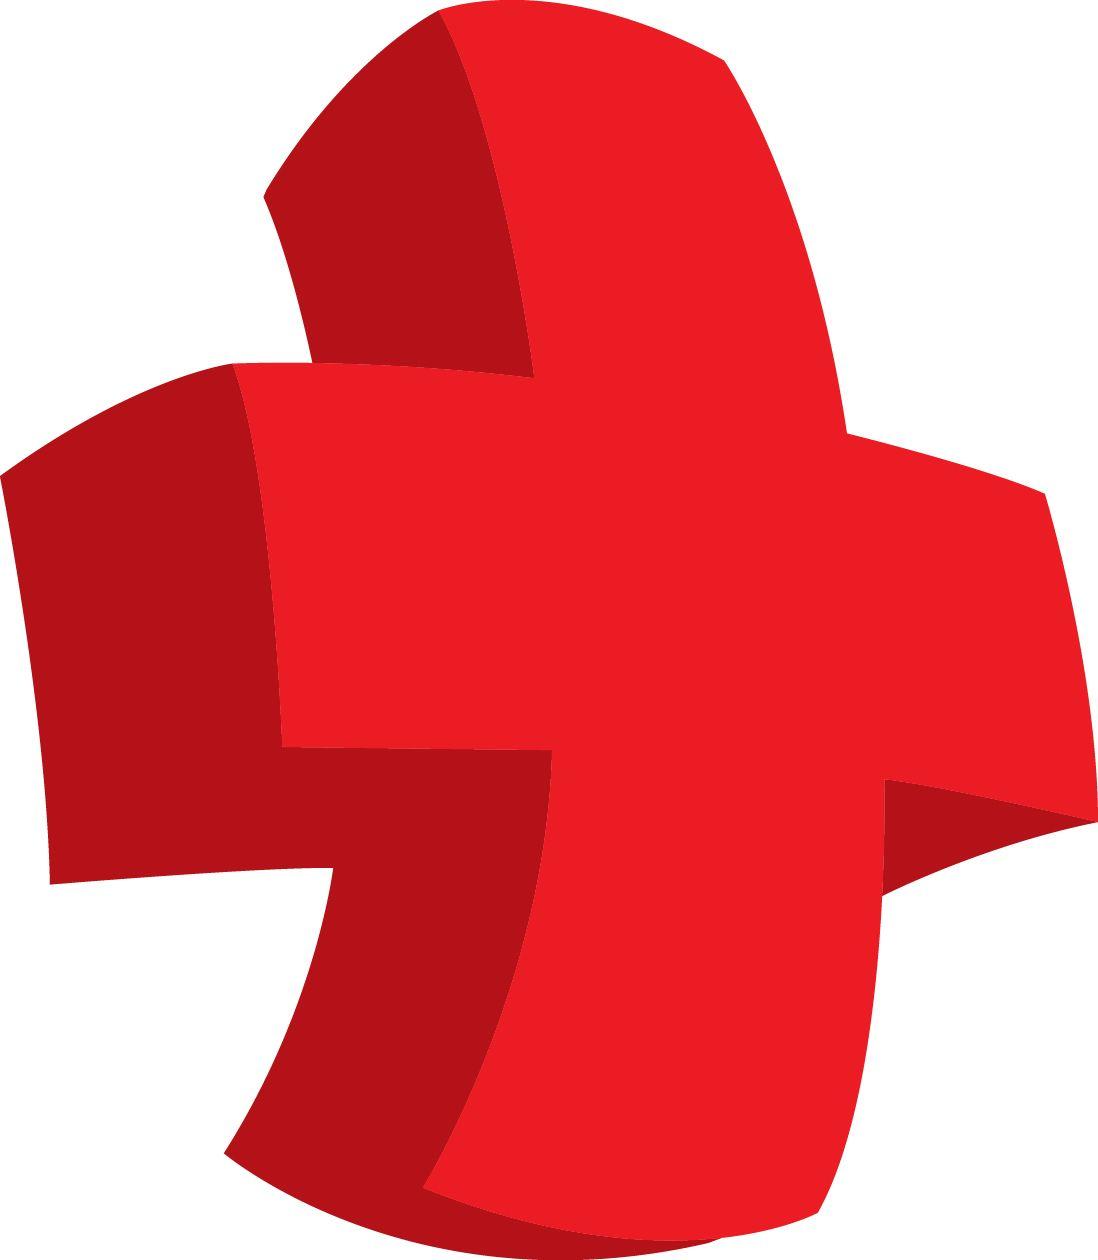 Red Block with White Cross Logo - Logo Of Red Square With White Cross - Clipart & Vector Design •